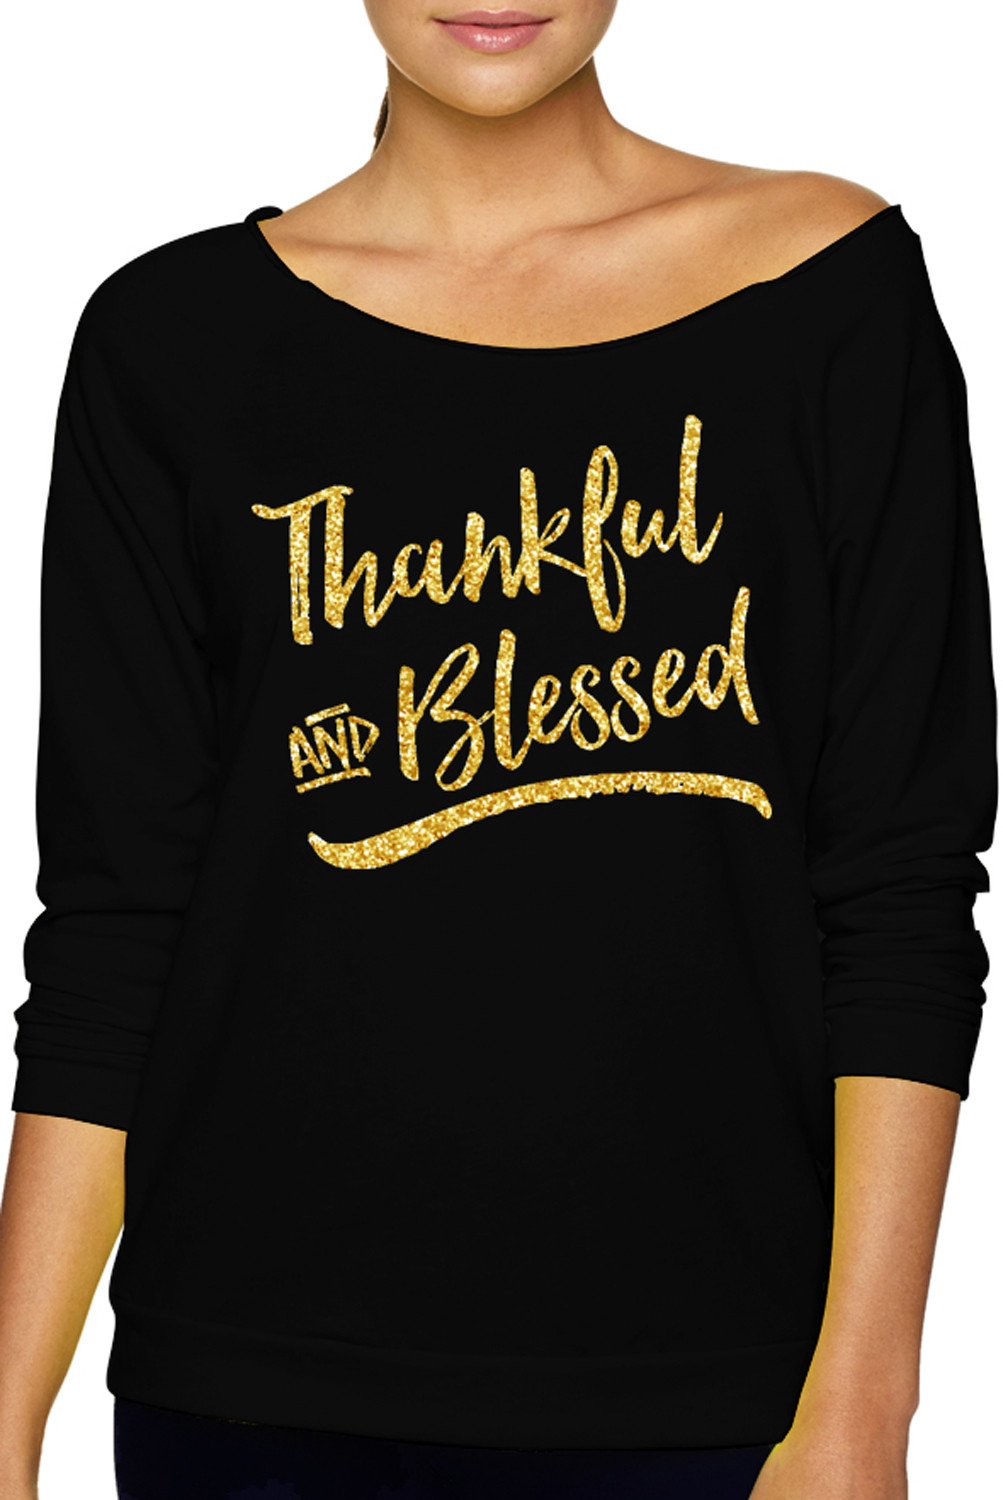 Thankful & Blessed Sweatshirt with Gold Glitter Print